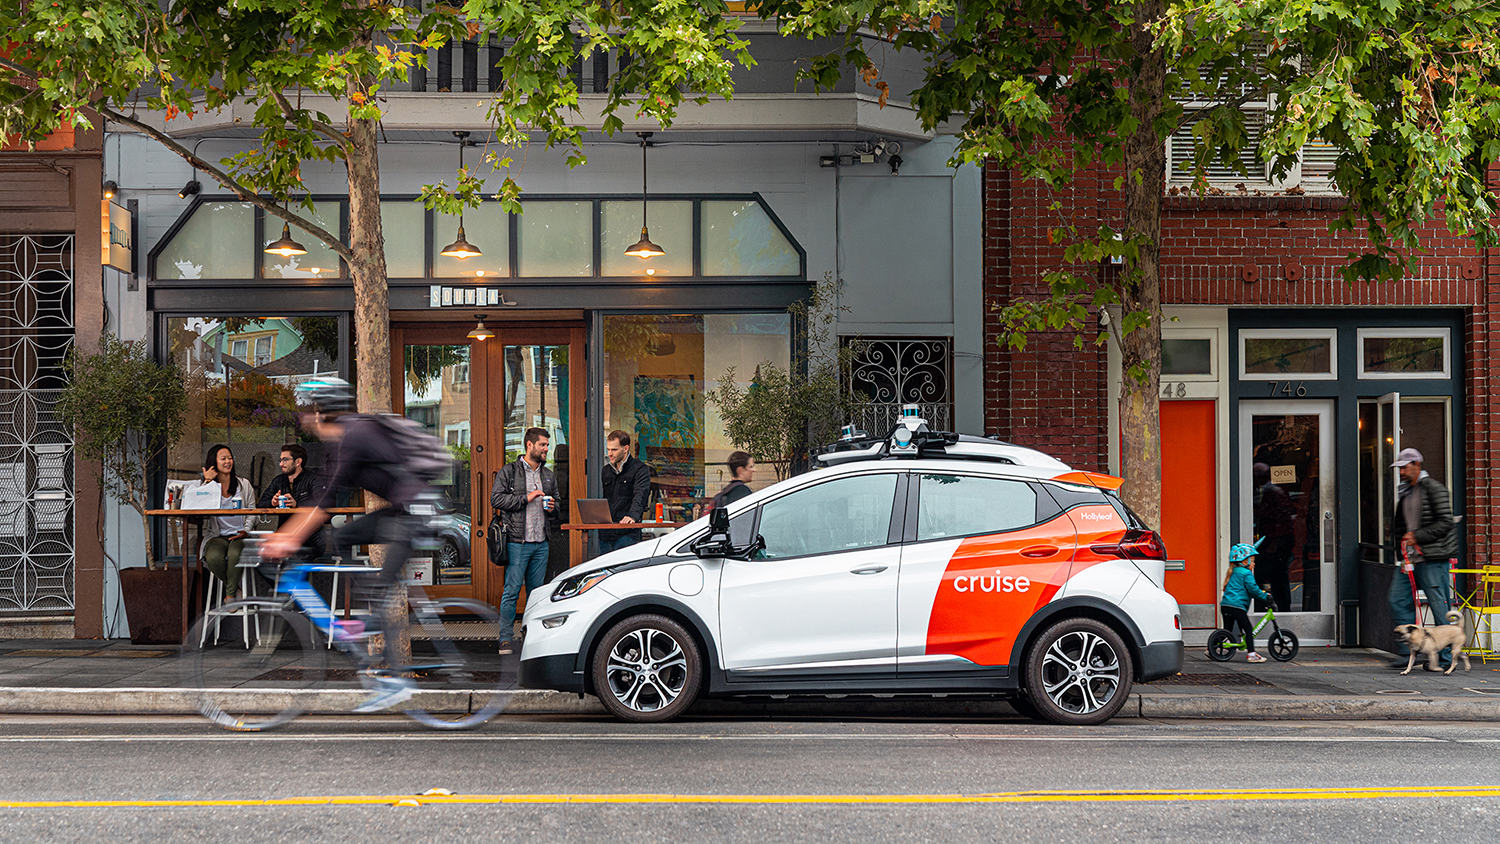 Cruise self-driving car in Hayes Valley, San Francisco pulled over